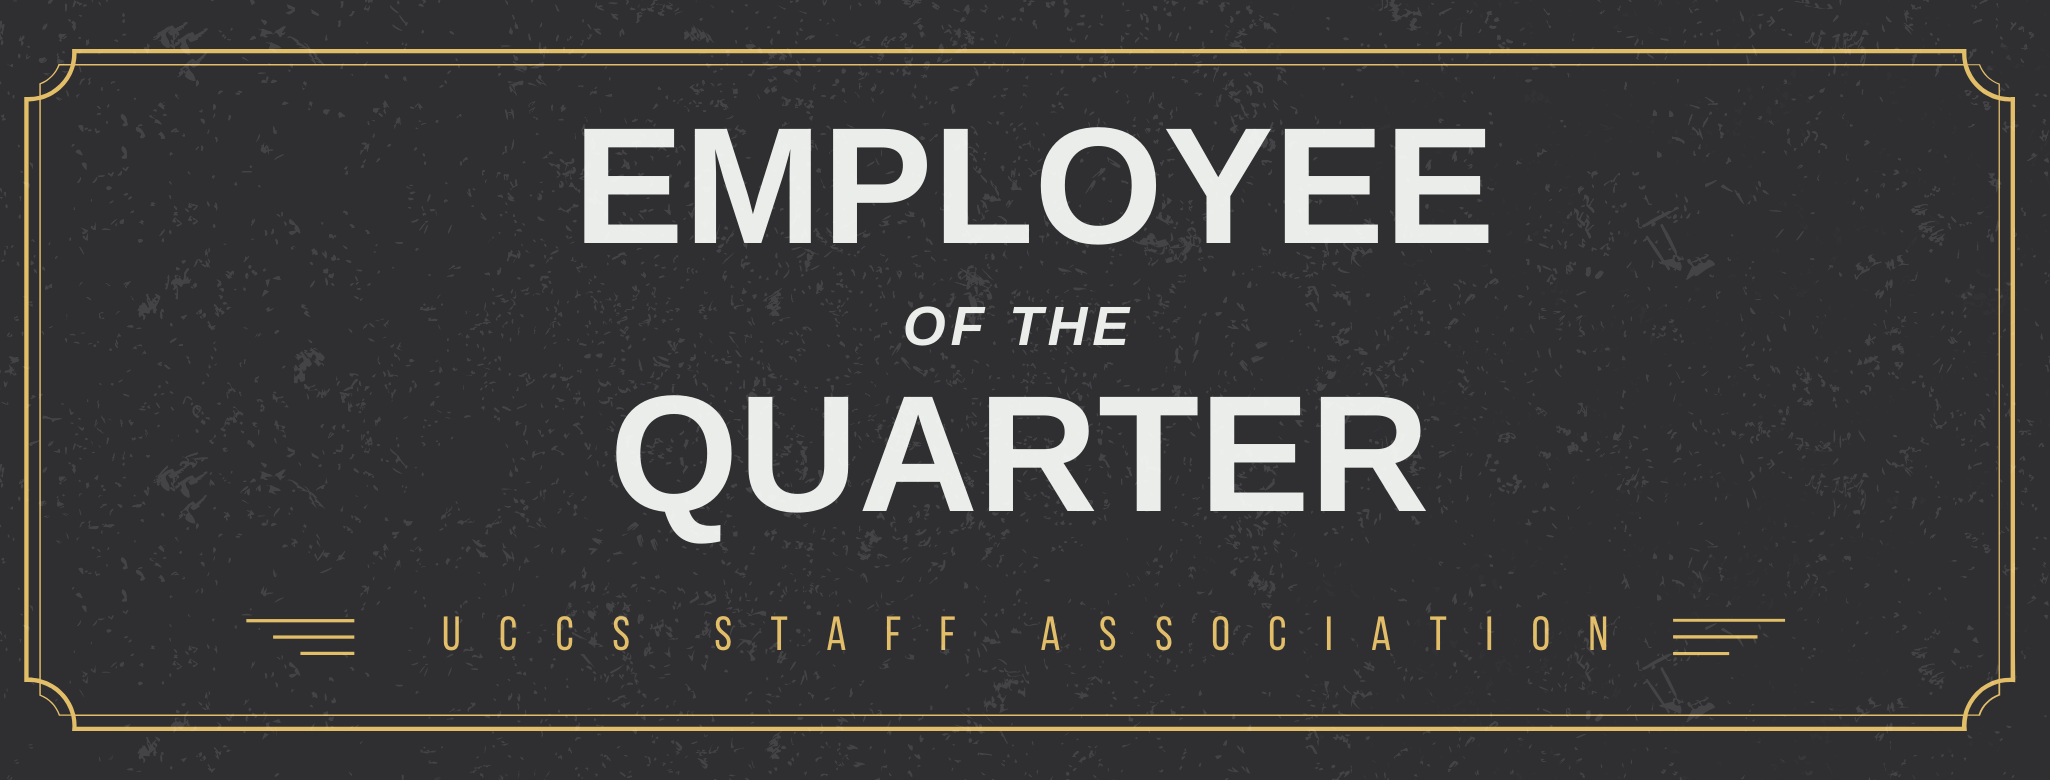 A gold and black banner reads "Employee of the Quarter: UCCS Staff Association"